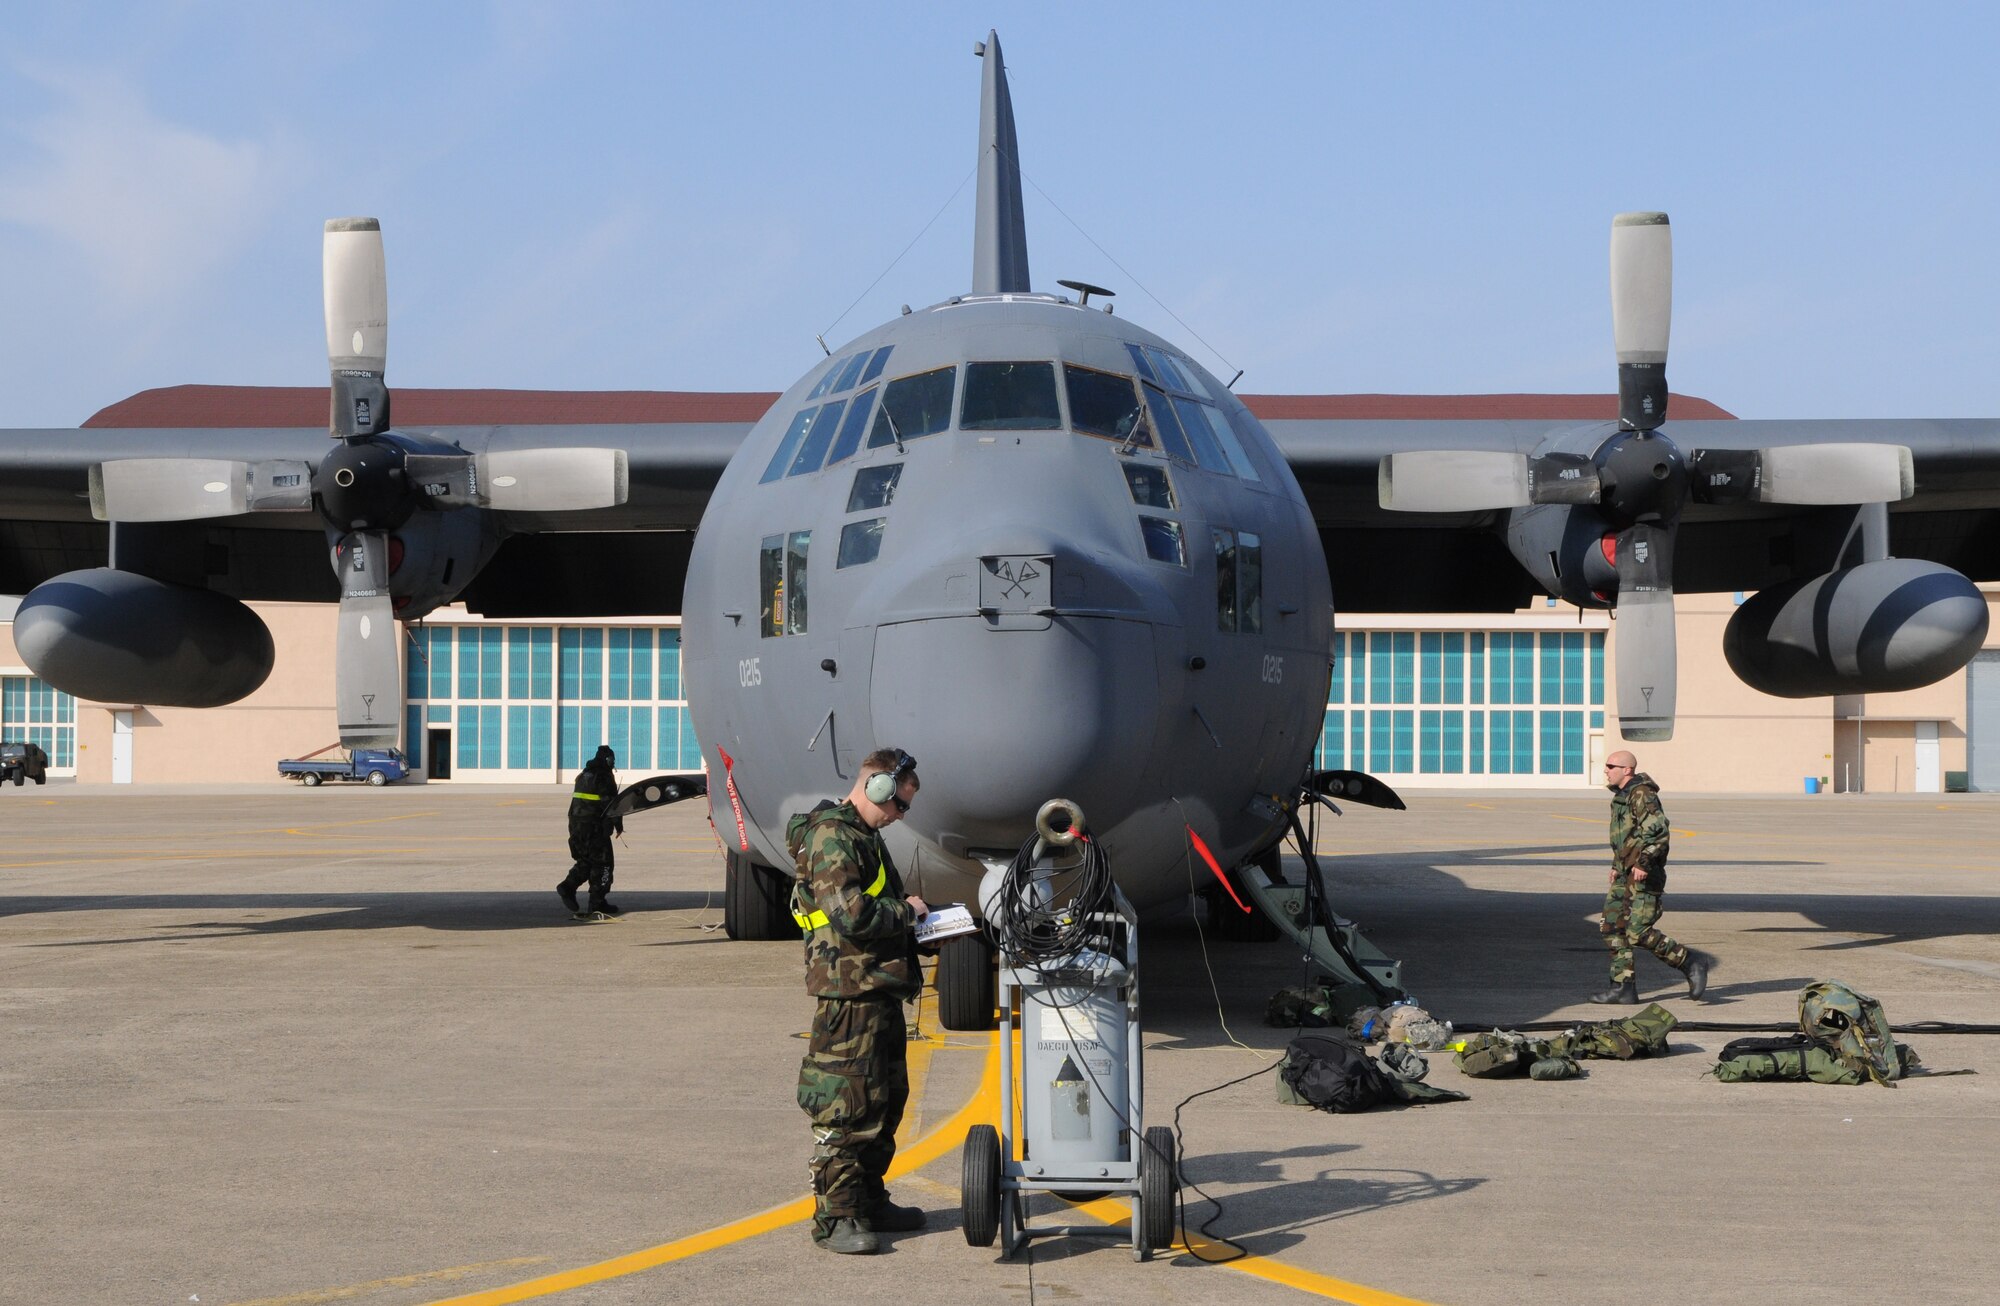 DAEGU AIR BASE, Republic of Korea -- Maintainers from the 353rd Maintenance Squadron prepare a 17th Special Operations Squadron MC-130P Combat Shadow to be defueled here March 24. More than 350 members of the 353rd Special Operations Group spent nearly a month at Daegu Air Base, Republic of Korea, testing and assessing their wartime skills necessary to survive and operate in any environment. (U.S. Air Force photo by Tech. Sgt. Aaron Cram)